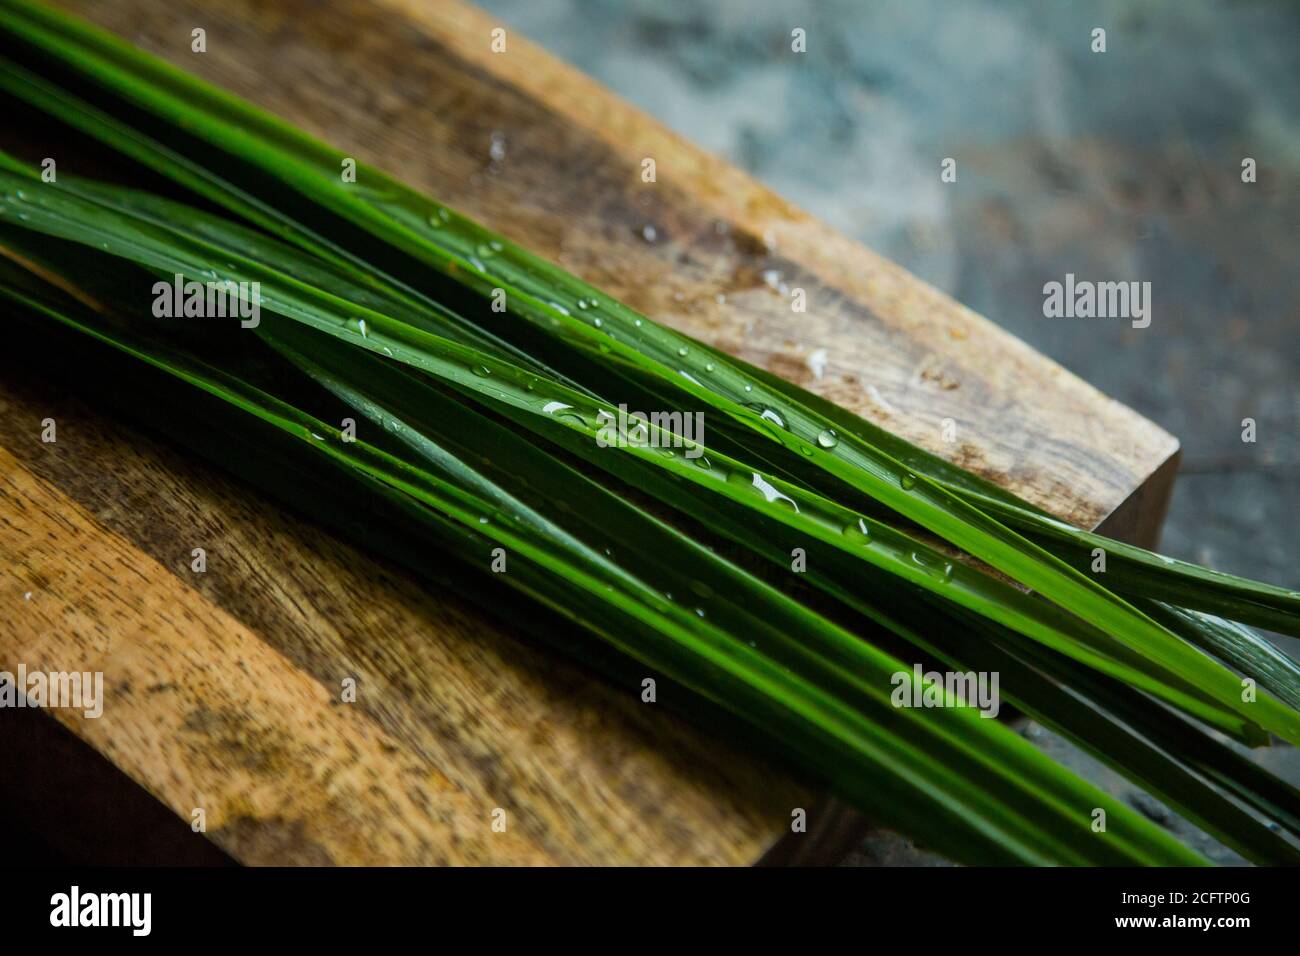 Fresh lemongrass or citronella grass on rustic wooden board. Herb used for healthy eating. Stock Photo